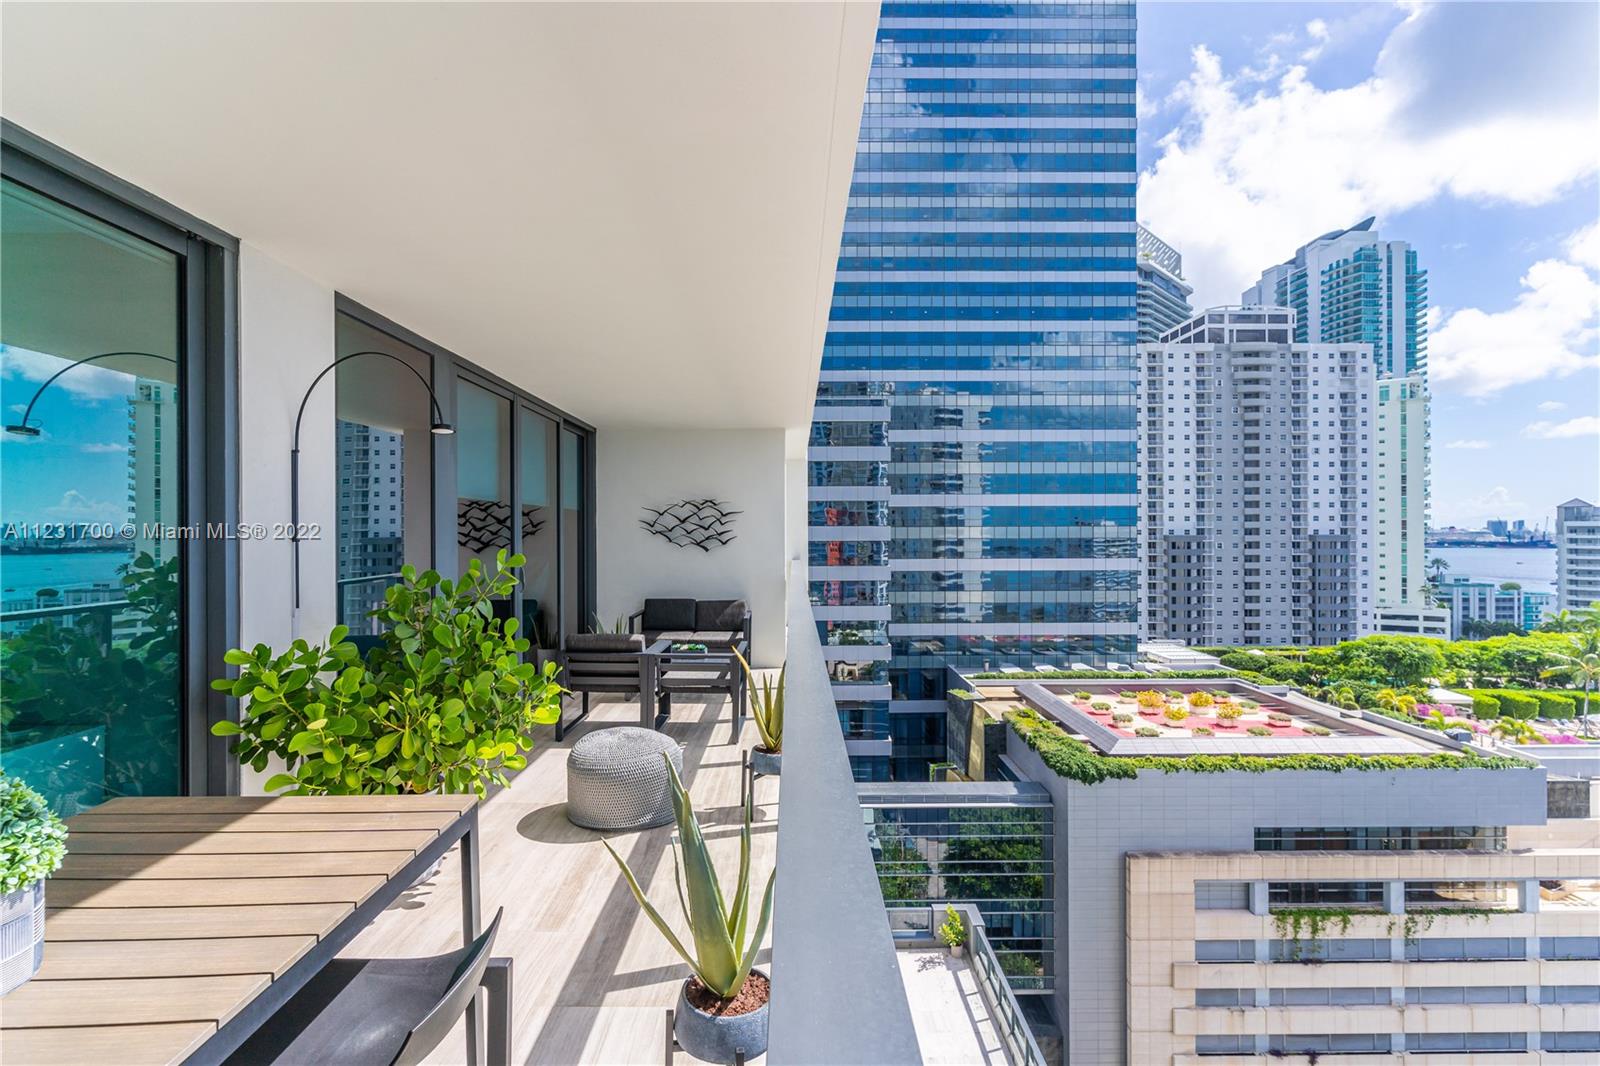 This boutique residential high rise is the most exclusive building in Brickell designed by world renowned architect Carlos Ott. Located in the epicenter of Miami's fastest growing metropolitan neighborhood, on the East side of Brickell Ave. Fully furnished -turnkey unit. Exquisitely designed. White oak wood floor. Breathtaking bay and city views, incredible sunrise from the expansive 281 sq.ft. terrace with summer kitchen that brings the outside in. Italian glass cabinetry, exquisite marble countertops and top-of-the-line Subzero, Wolf and Bosch appliances. Apple home technology, robotic parking system, infinity-edge pool, state-of-the-art gym, and spa deck with panoramic views of Biscayne Bay and Downtown Miami. 24 hour Valet, Security & concierge.